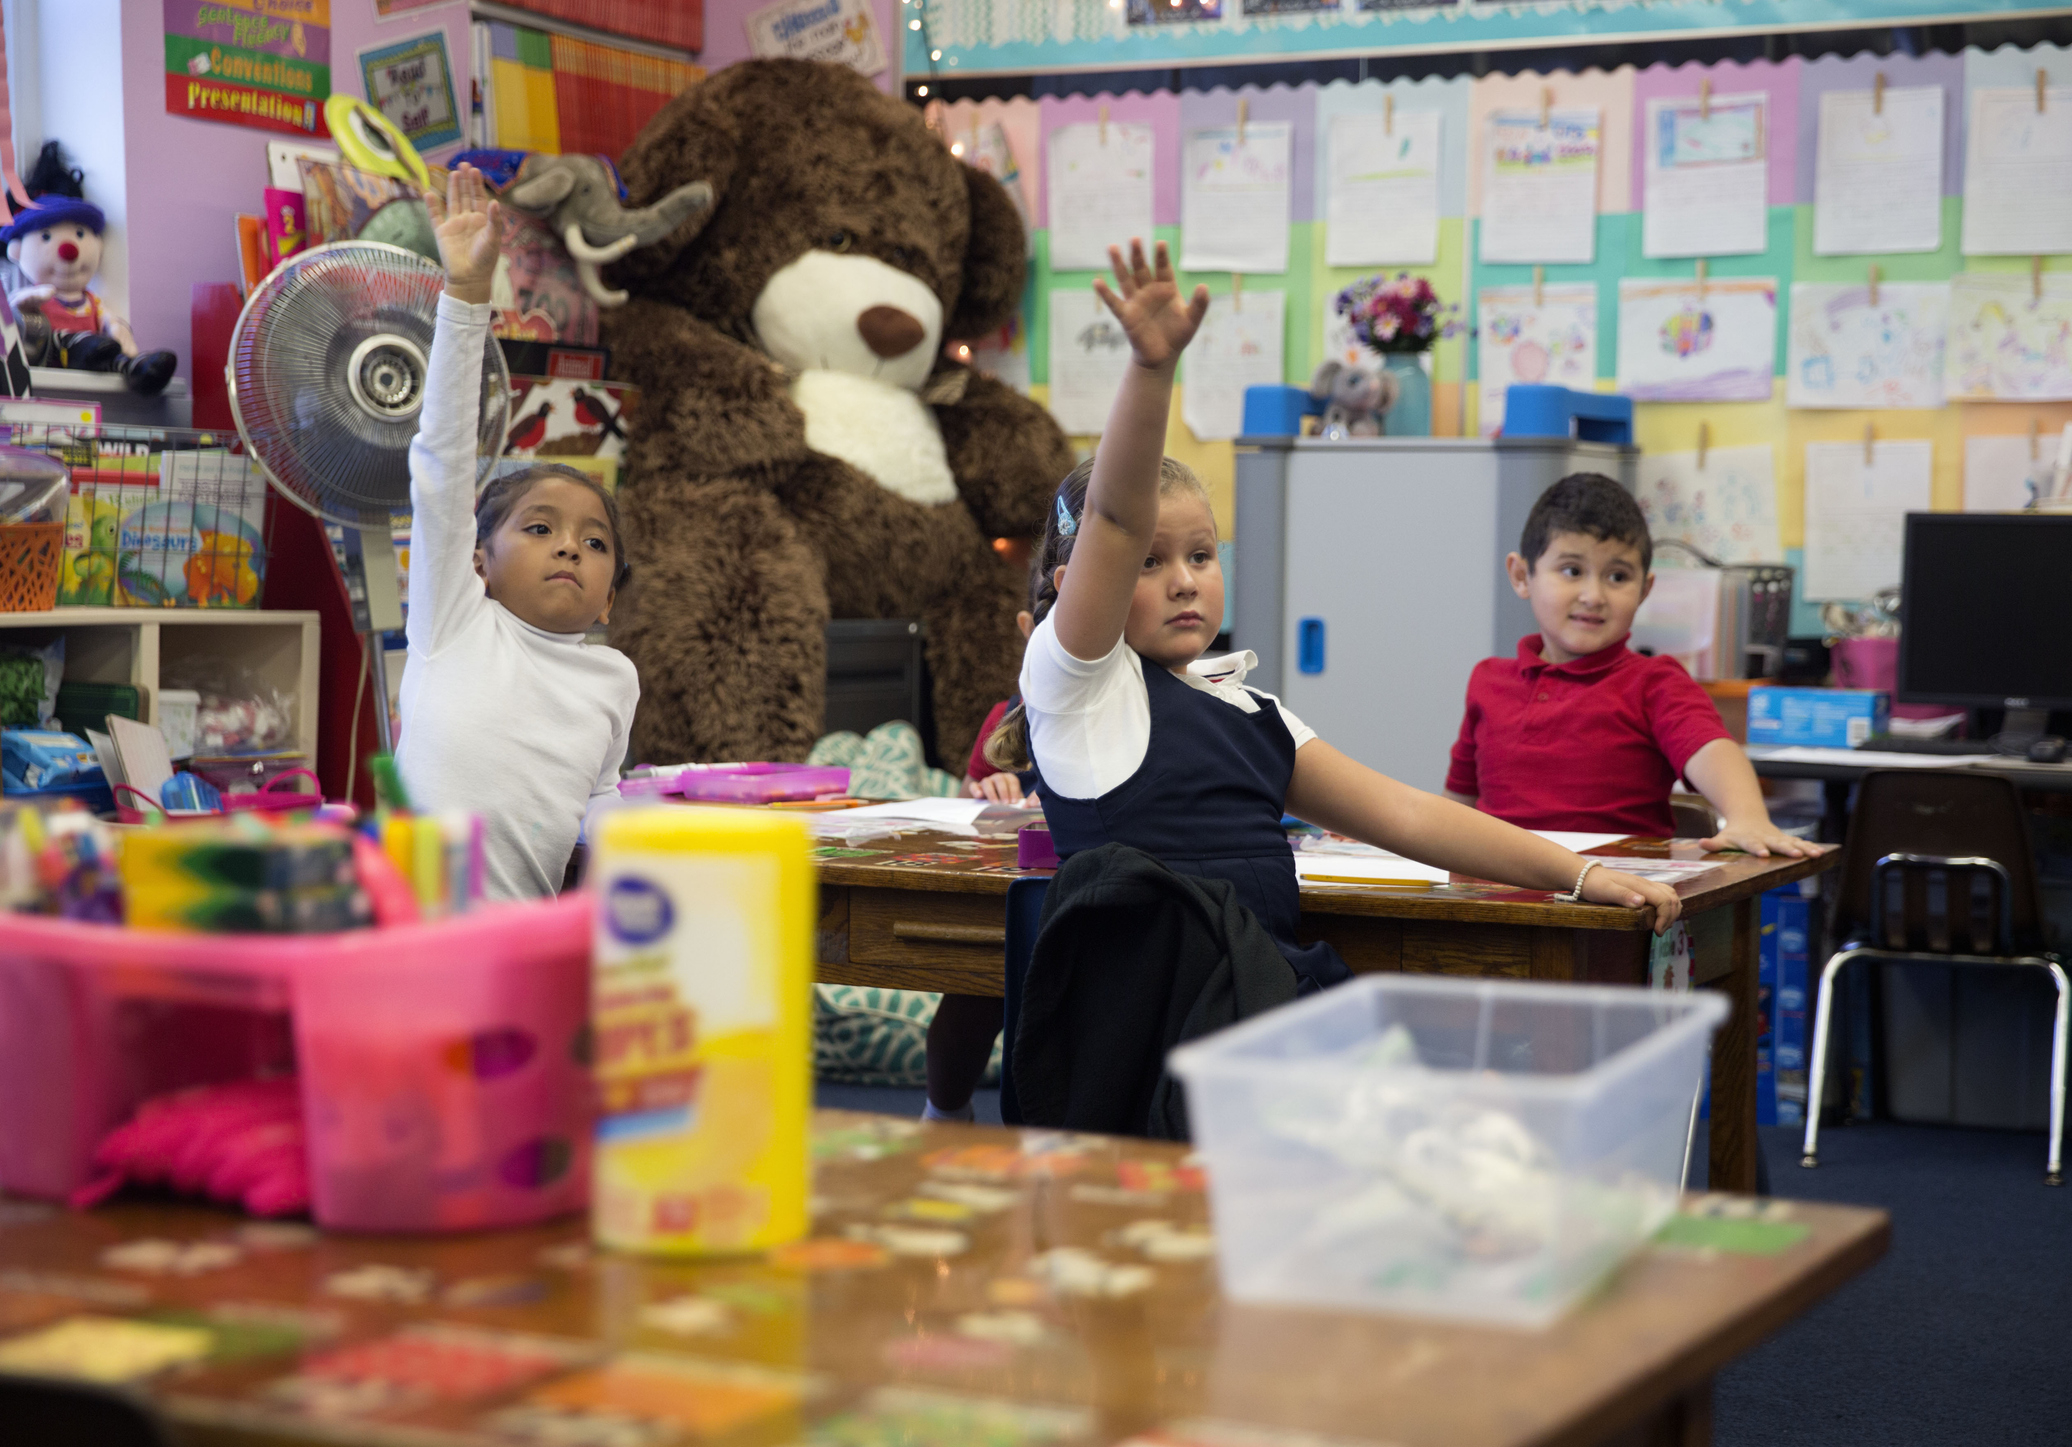 Three children in a classroom setting with their hands raised, looking eager to answer a question